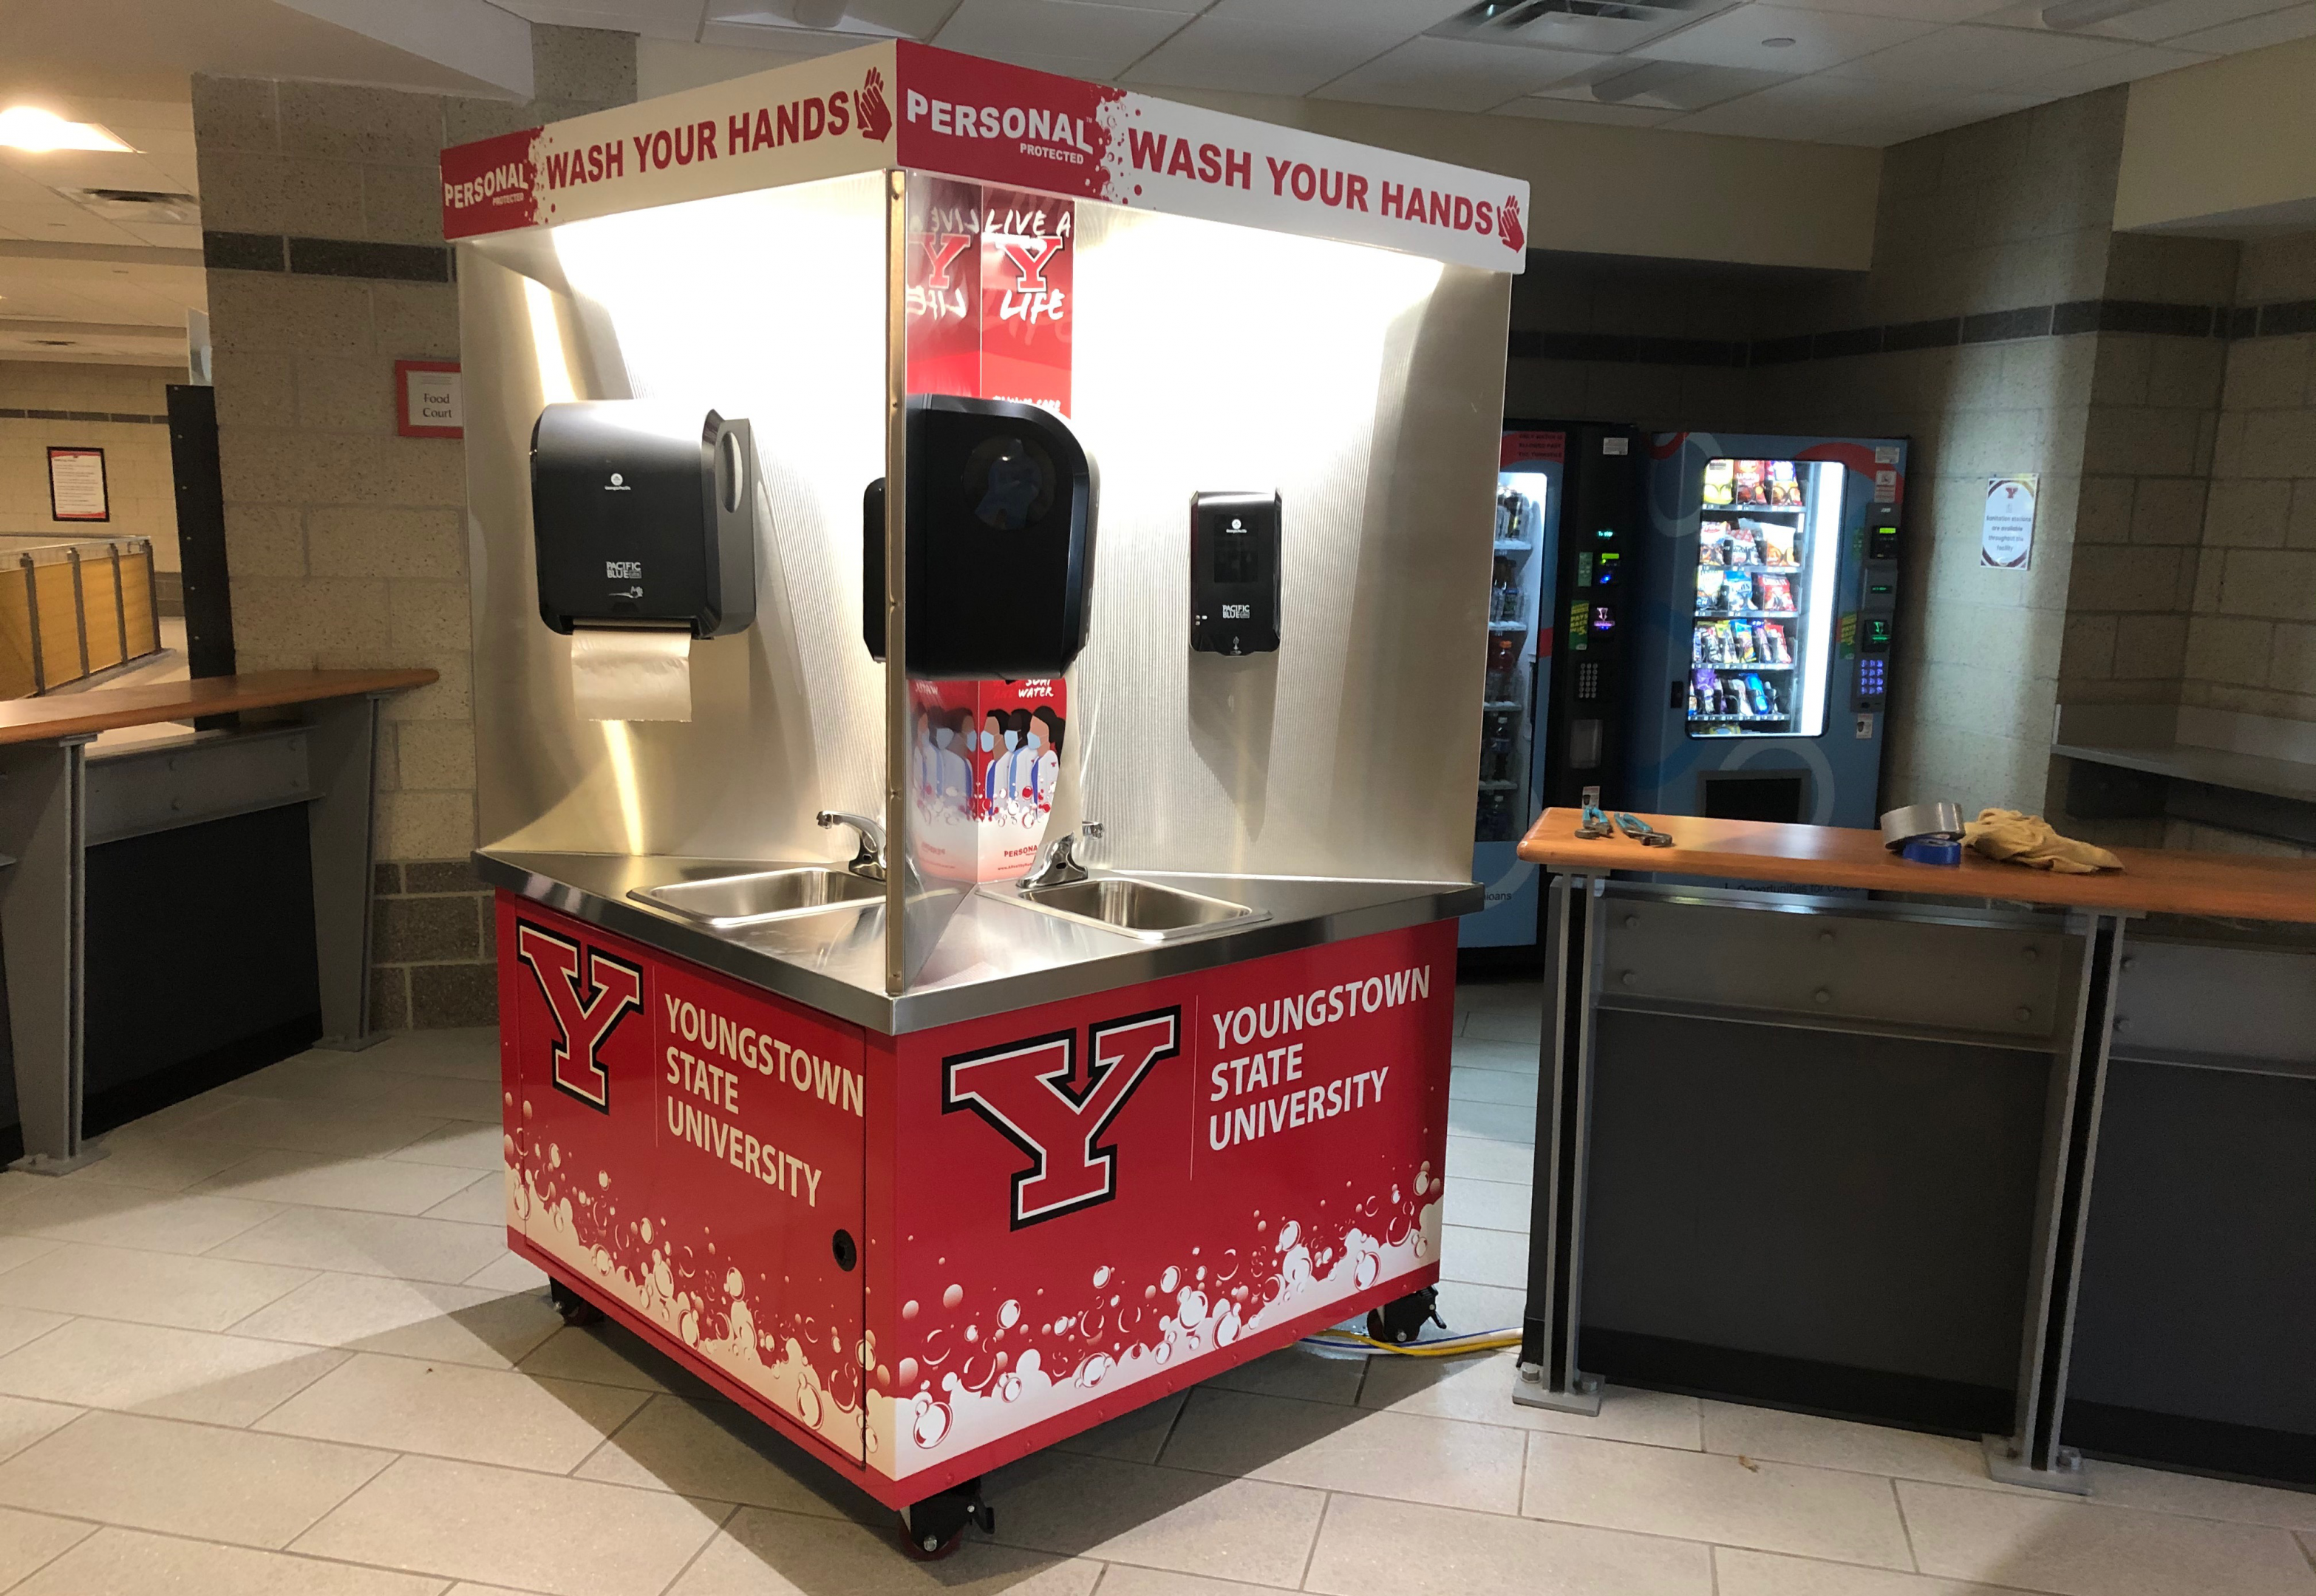 The new YSU branded handwashing stations that will be available across campus in the fall